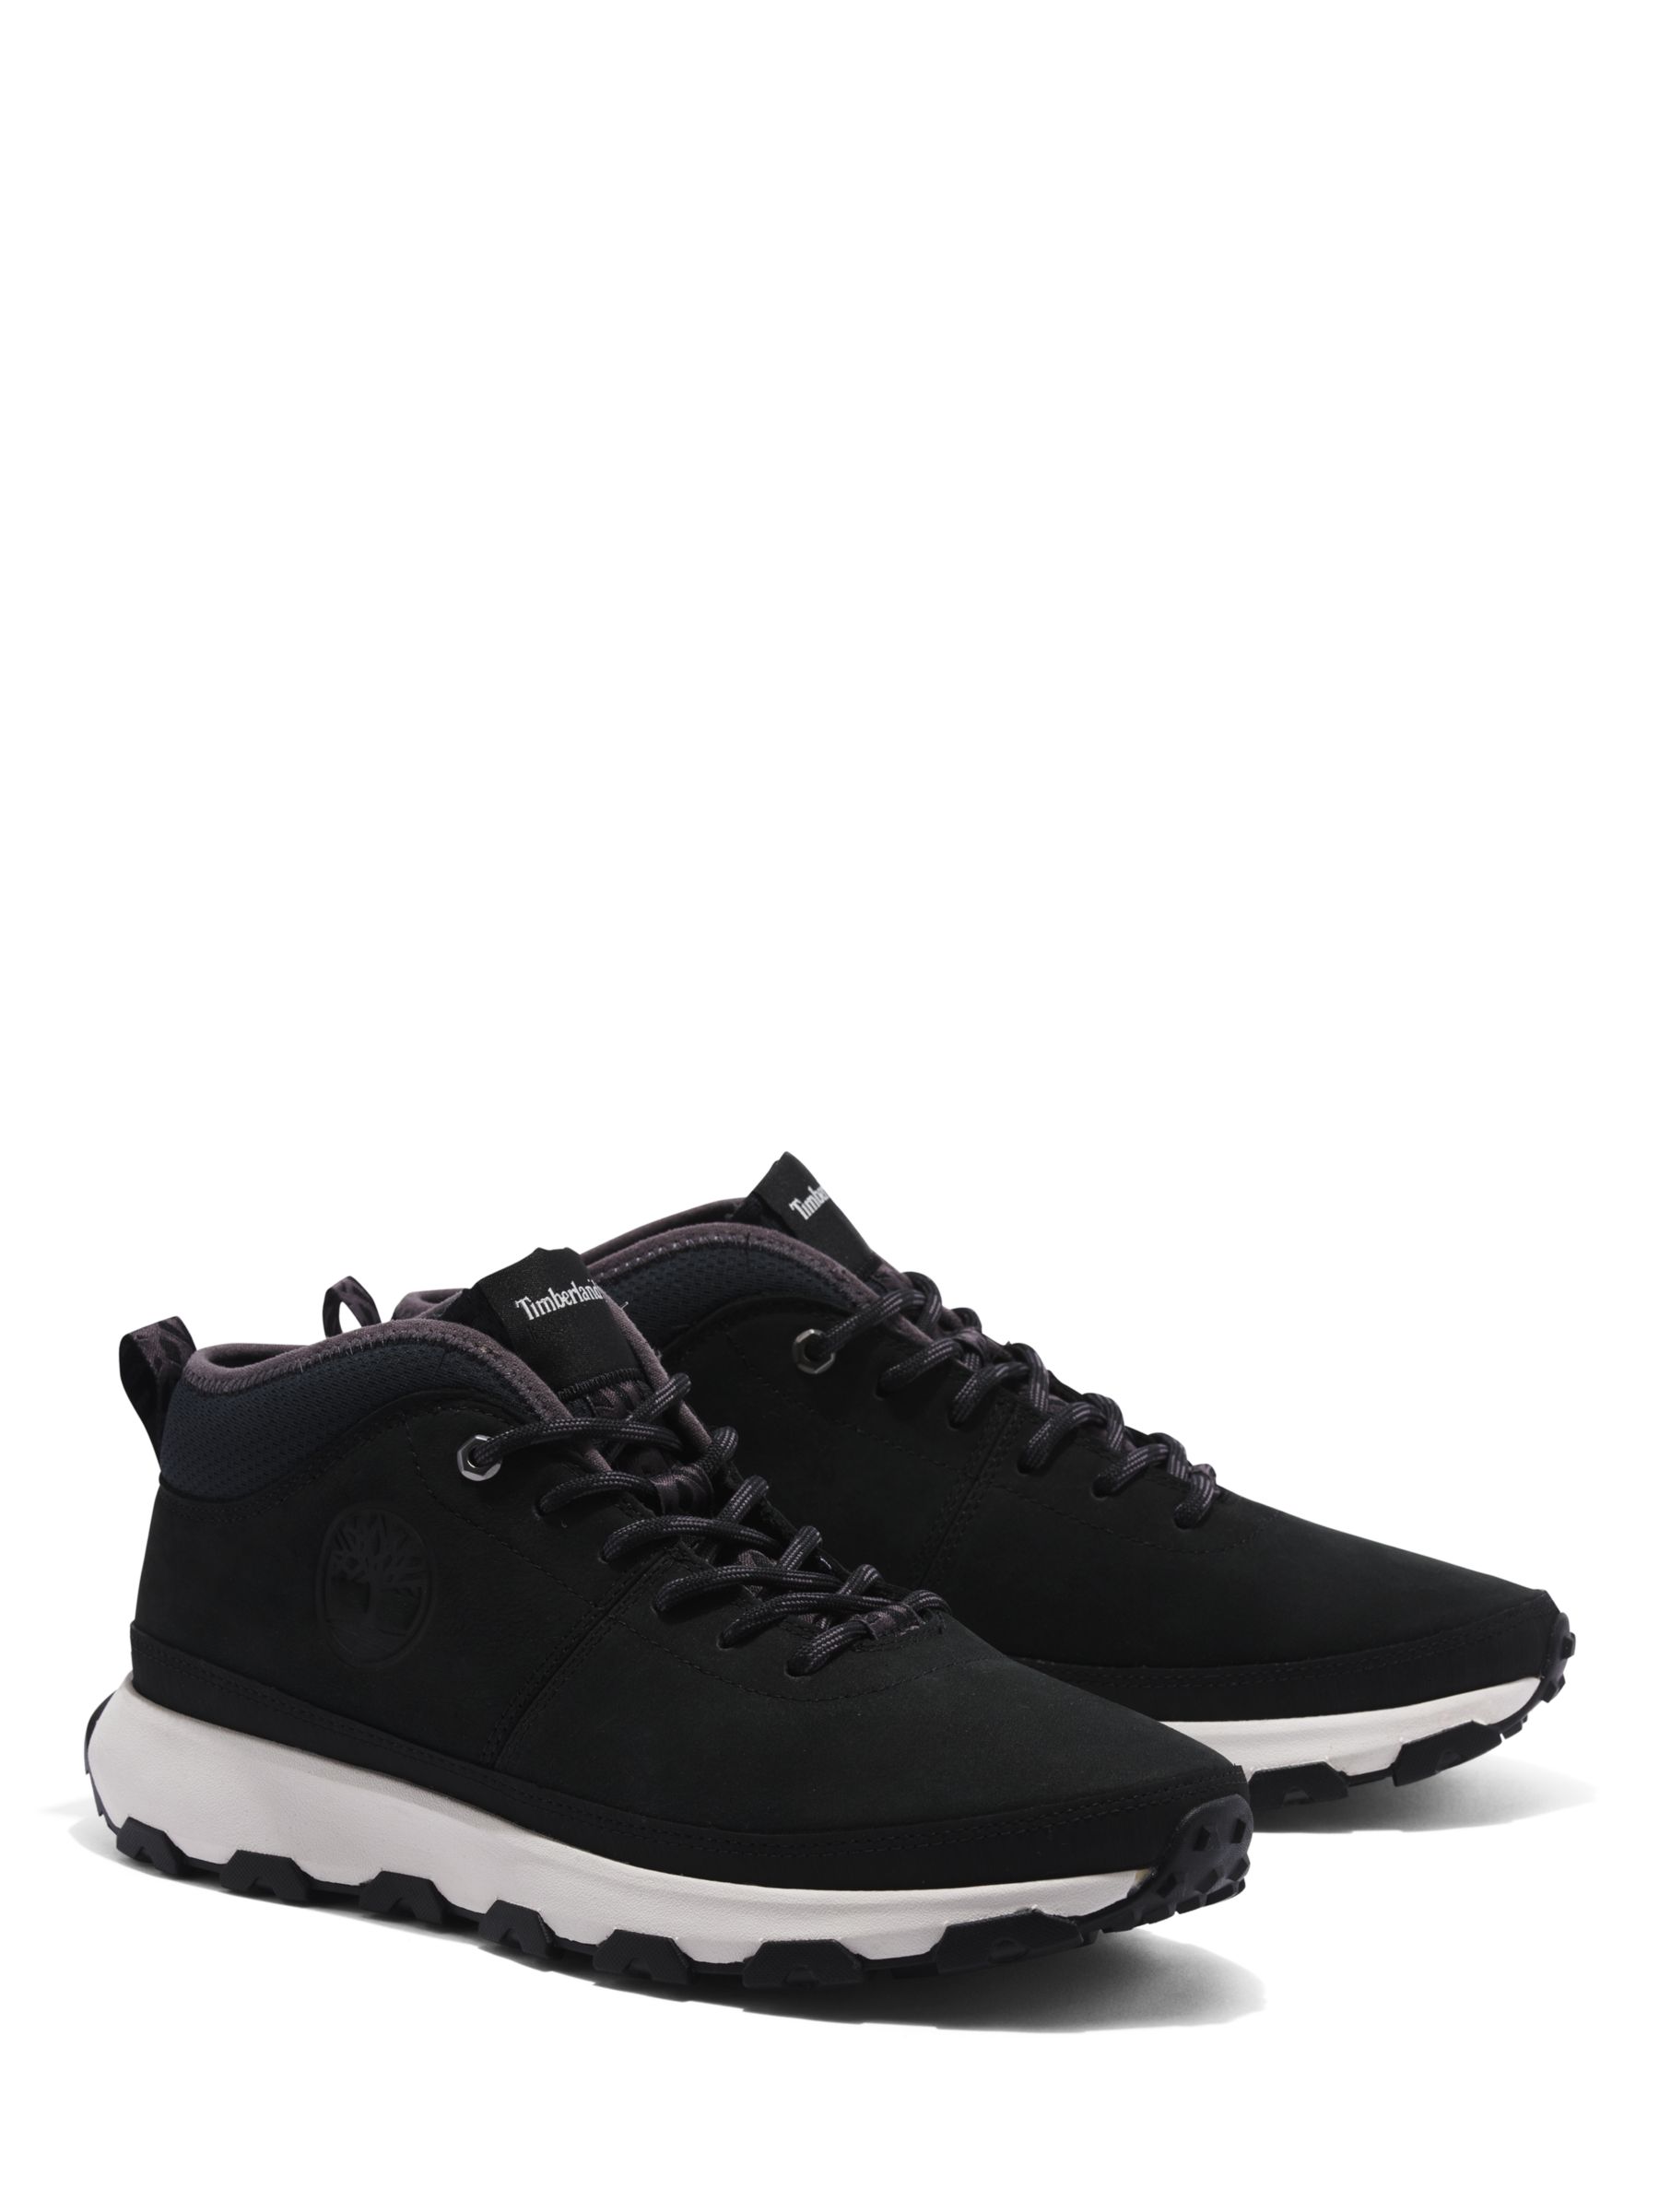 Timberland Winsor Trail Shoes, Black at John Lewis & Partners